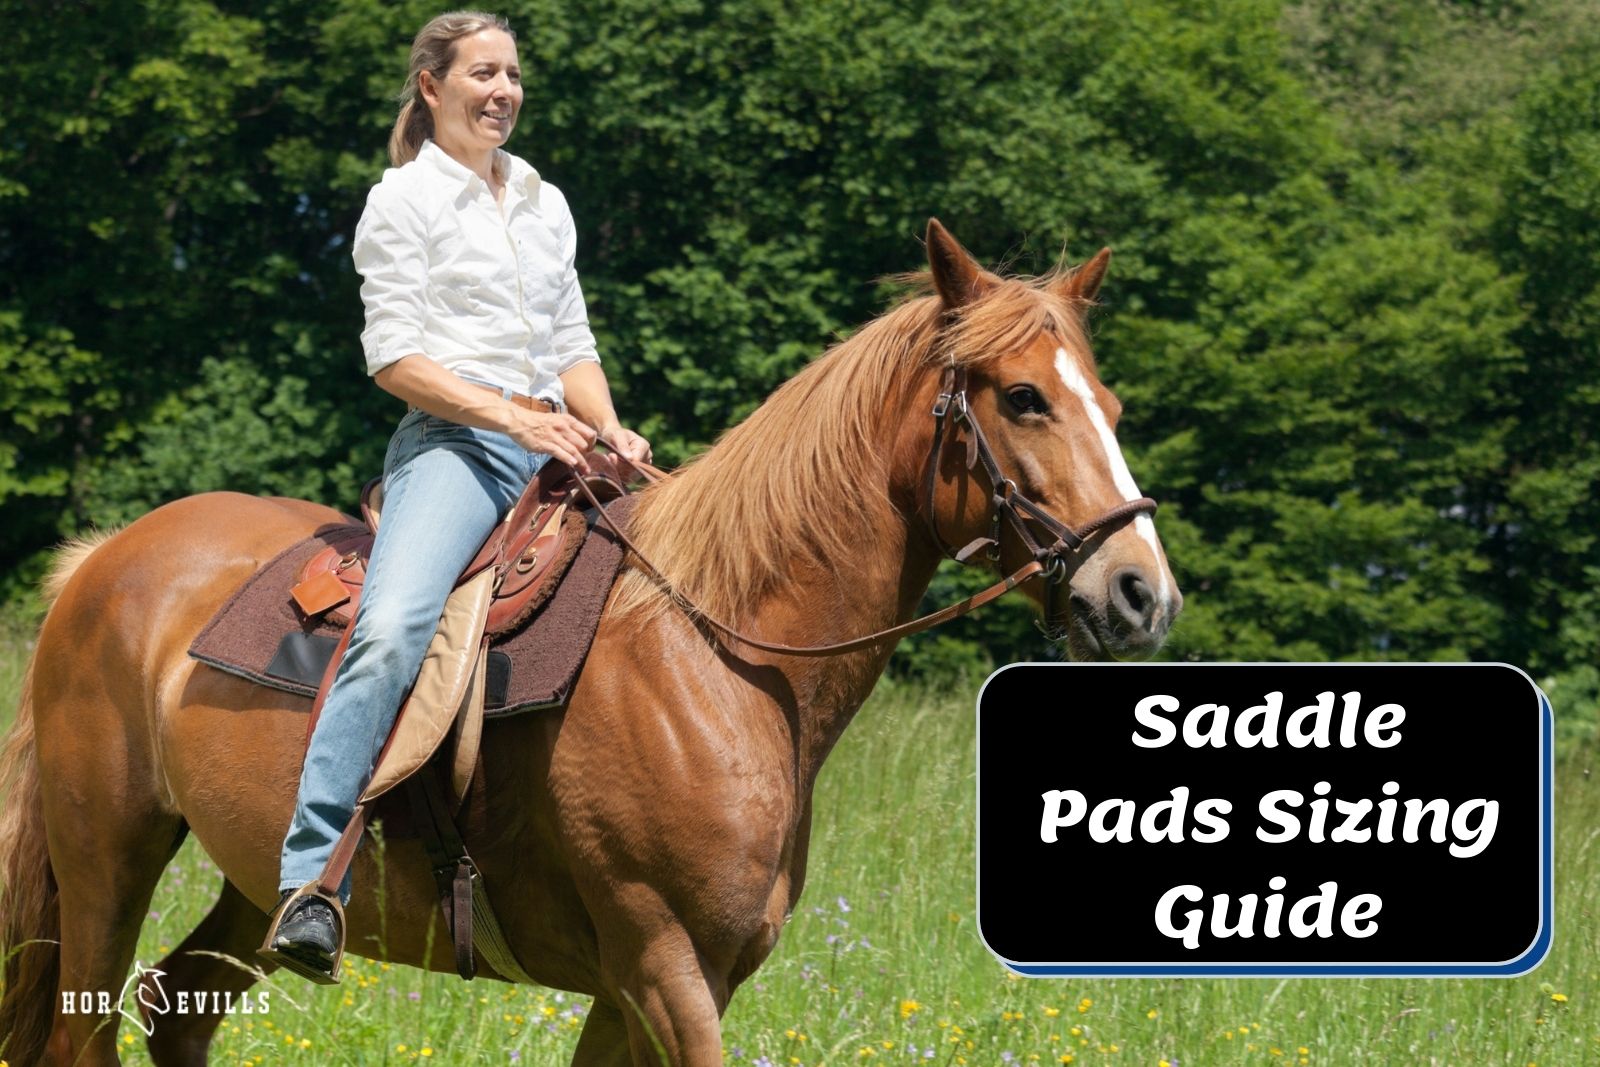 lady having a trail riding with her horse (saddle pad sizes guide)